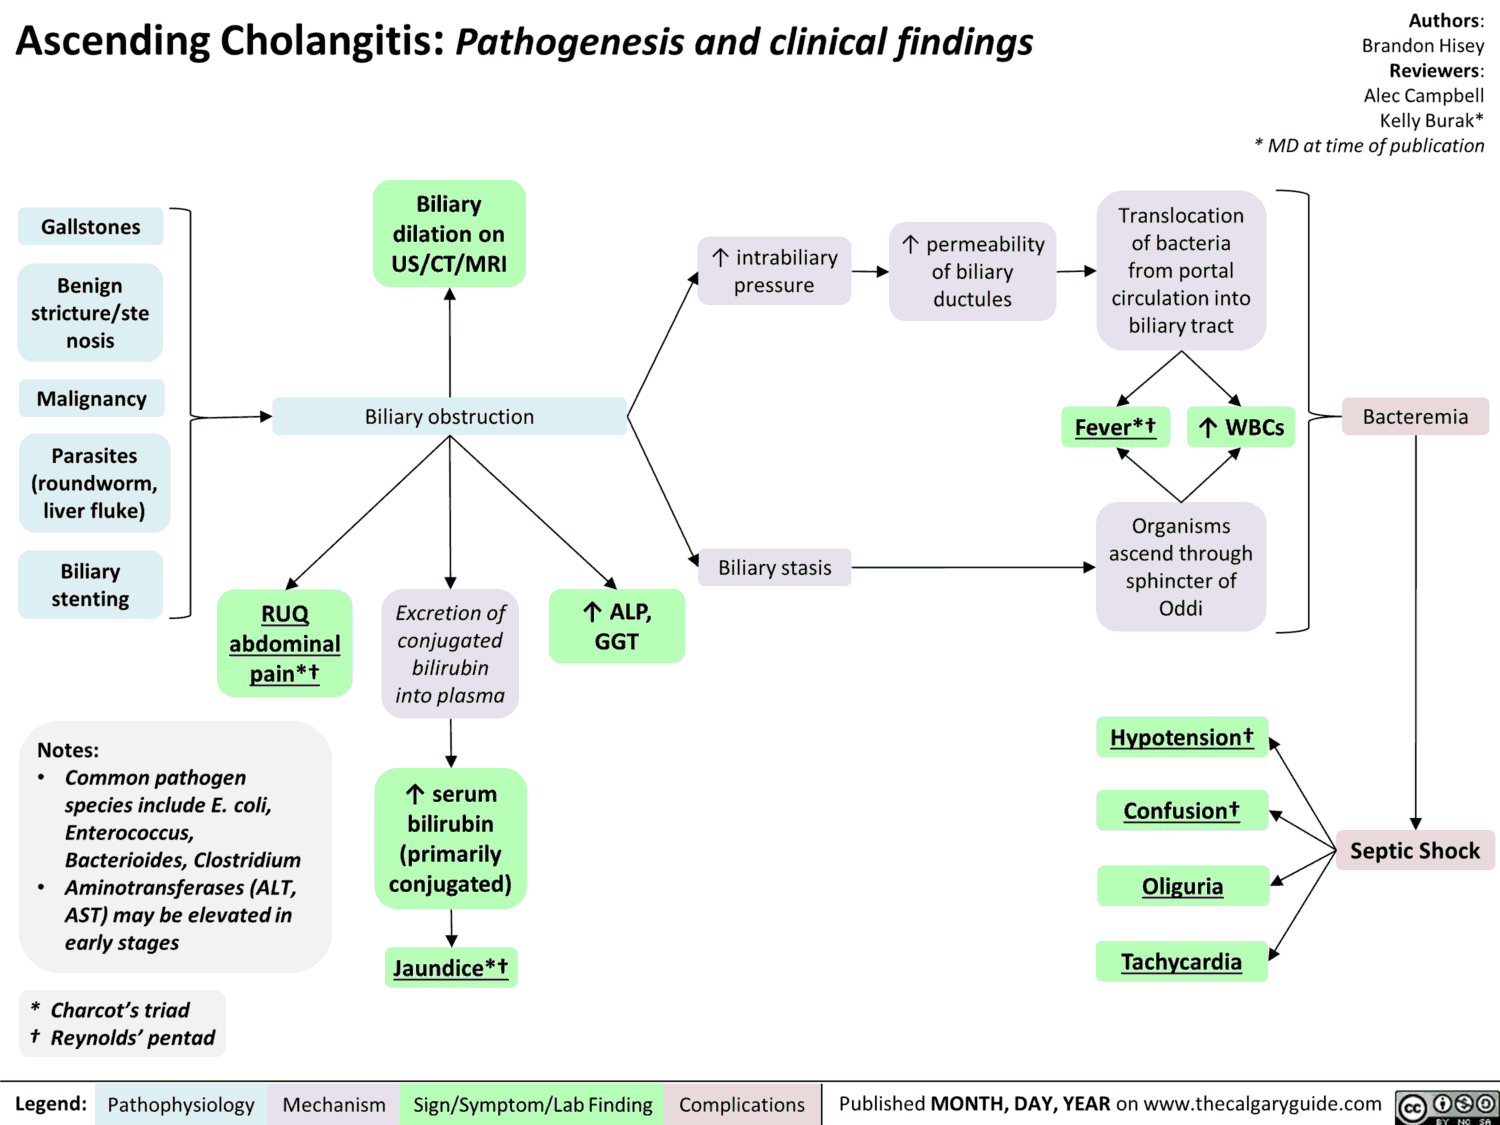 Ascending Cholangitis - Pathogenesis and Clinical Findings